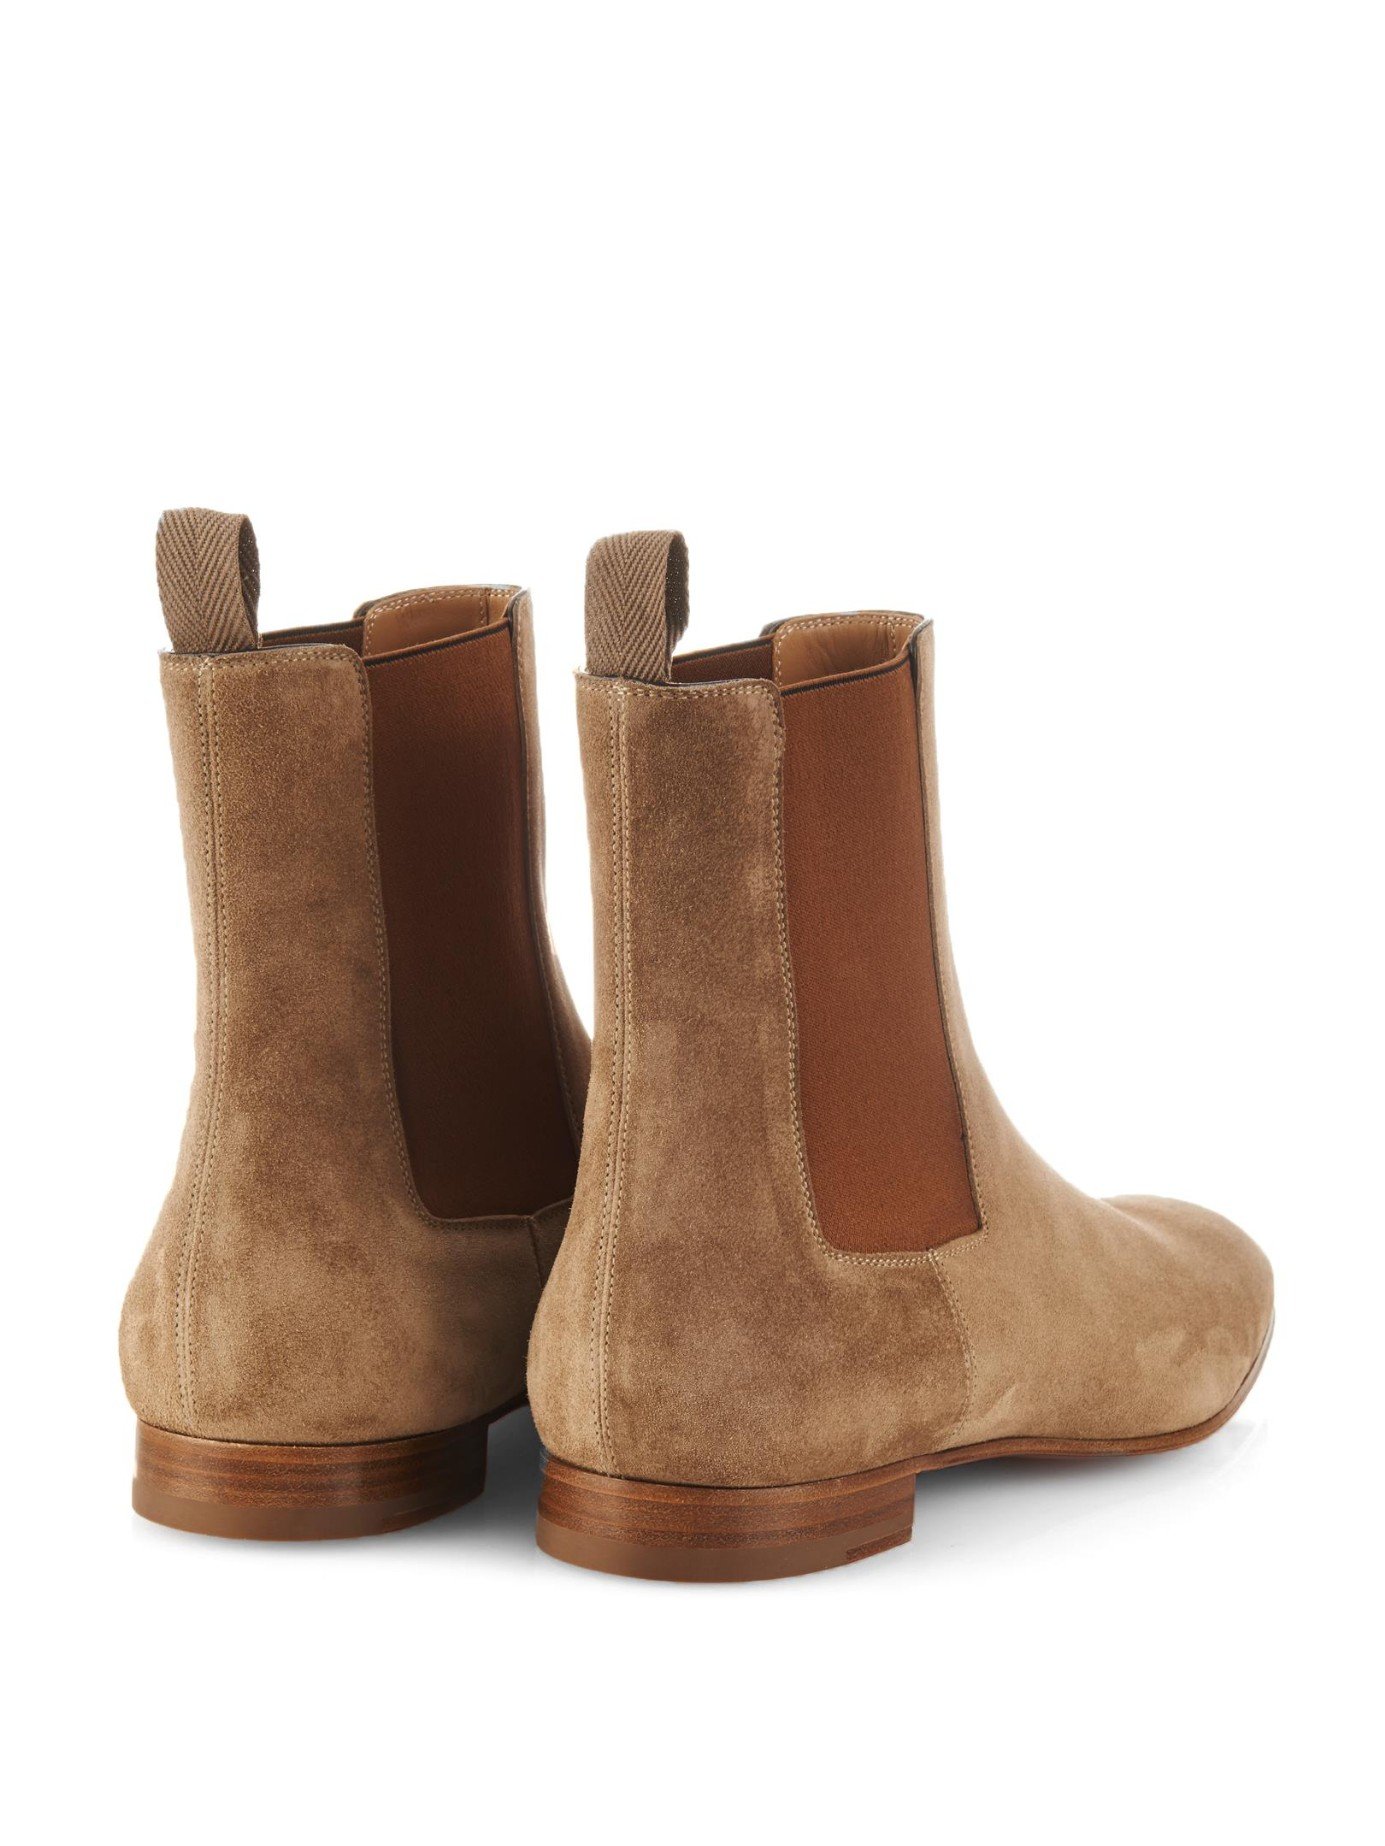 christian louboutin beige suede boots